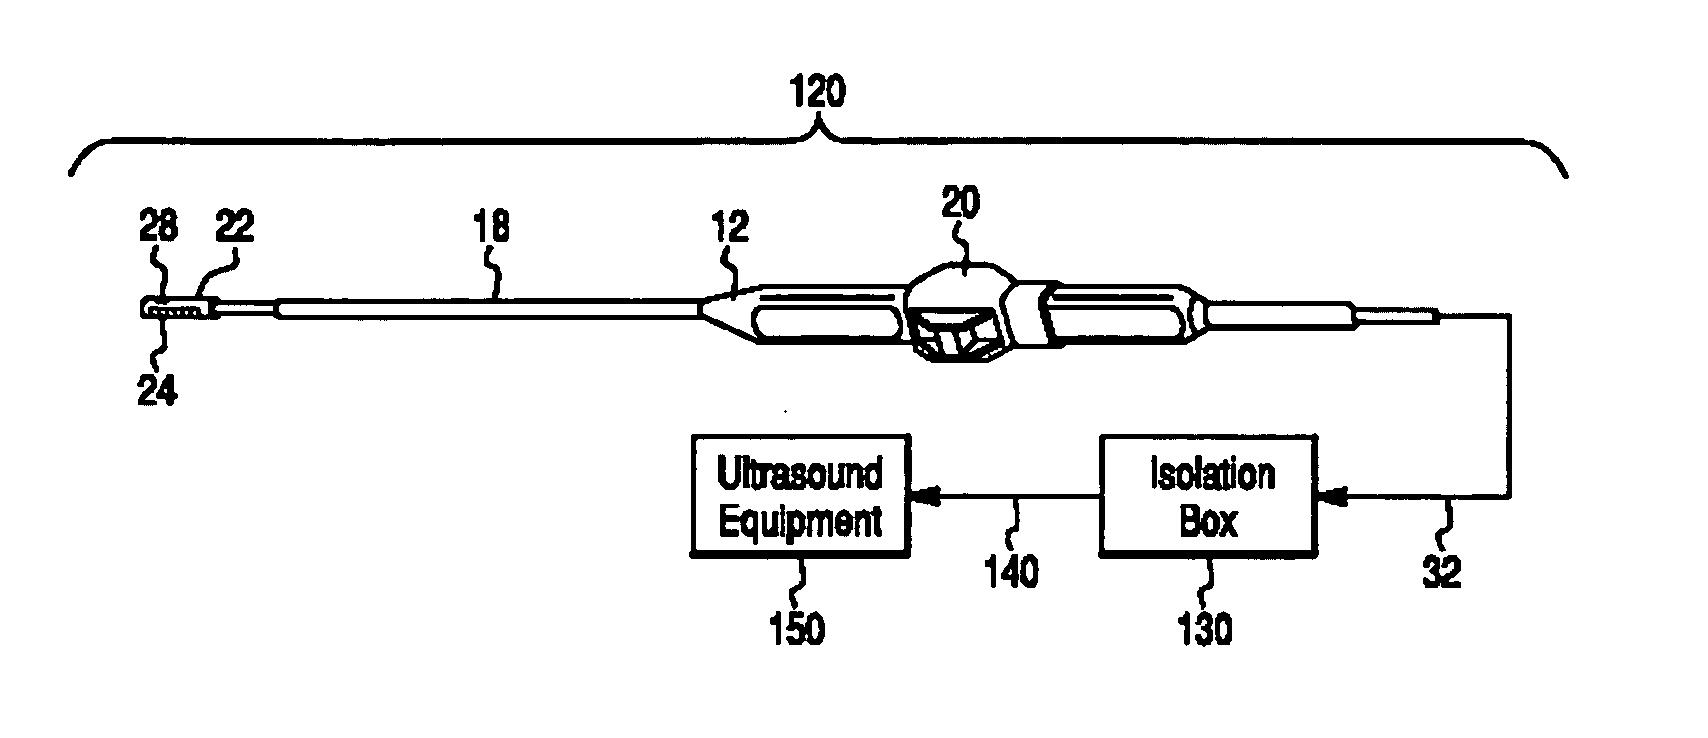 Safety systems and methods for ensuring safe use of intra-cardiac ultrasound catheters